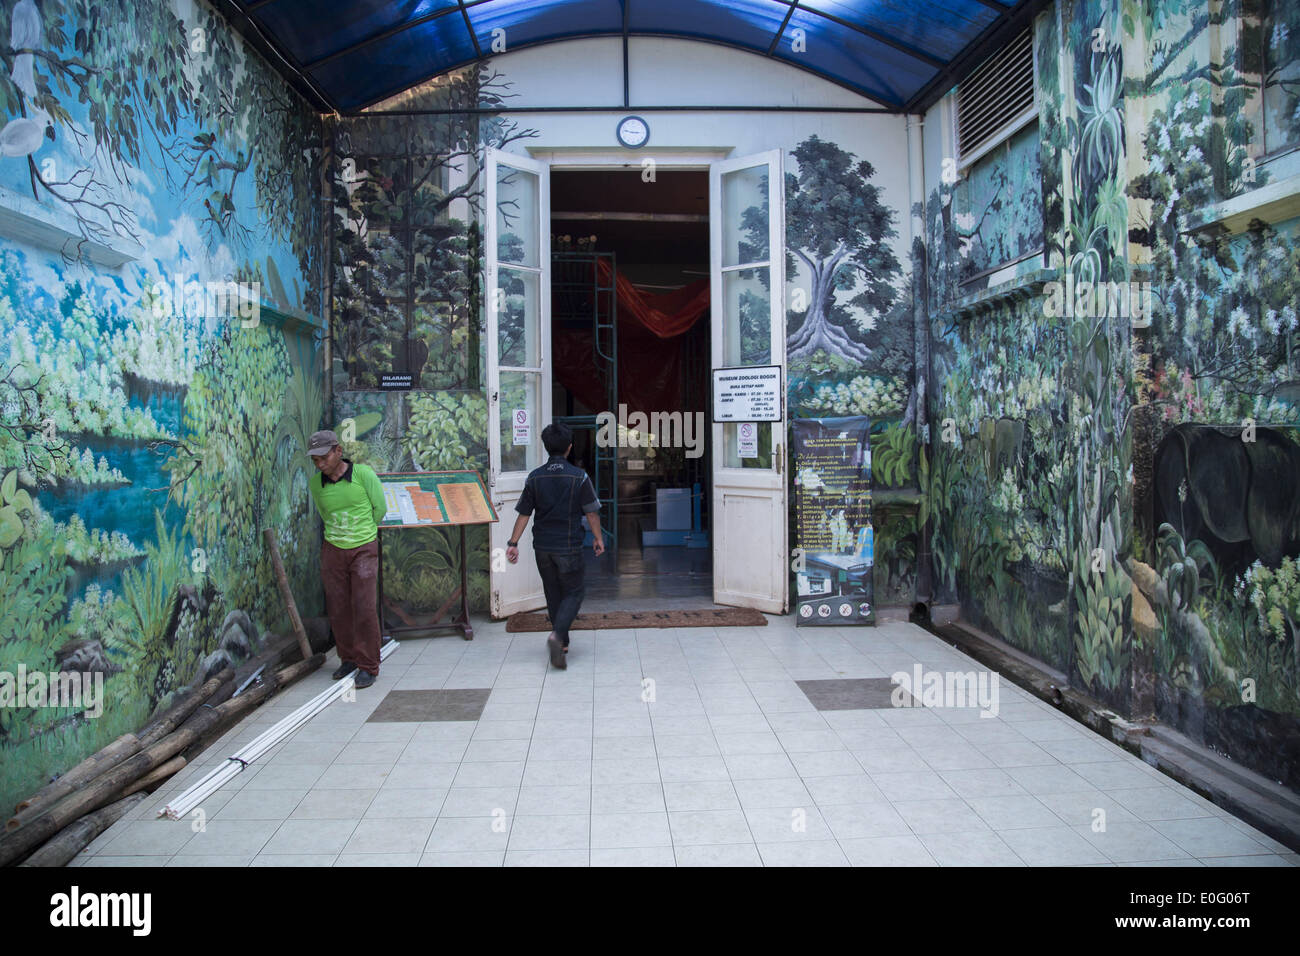 May 12, 2014 - Bogor, West Java, Indonesia - Entrance to the museum. Zoology Museum located in Bogor, West Java, Indonesia wast built during the colonial era in 1894 by the name ''Zoologicum Bogoriens by Dr. J. C. Koningsberger as Zoology Lab that doing research related to zoology.Nowadays the museum under Indonesia Research Organization have mission to provide Indonesian Fauna Information to young generation as part of science education and also to become international known zoology information in Indonesia. The museum need more help by government to make it look better. (Credit Image: © Dona Stock Photo